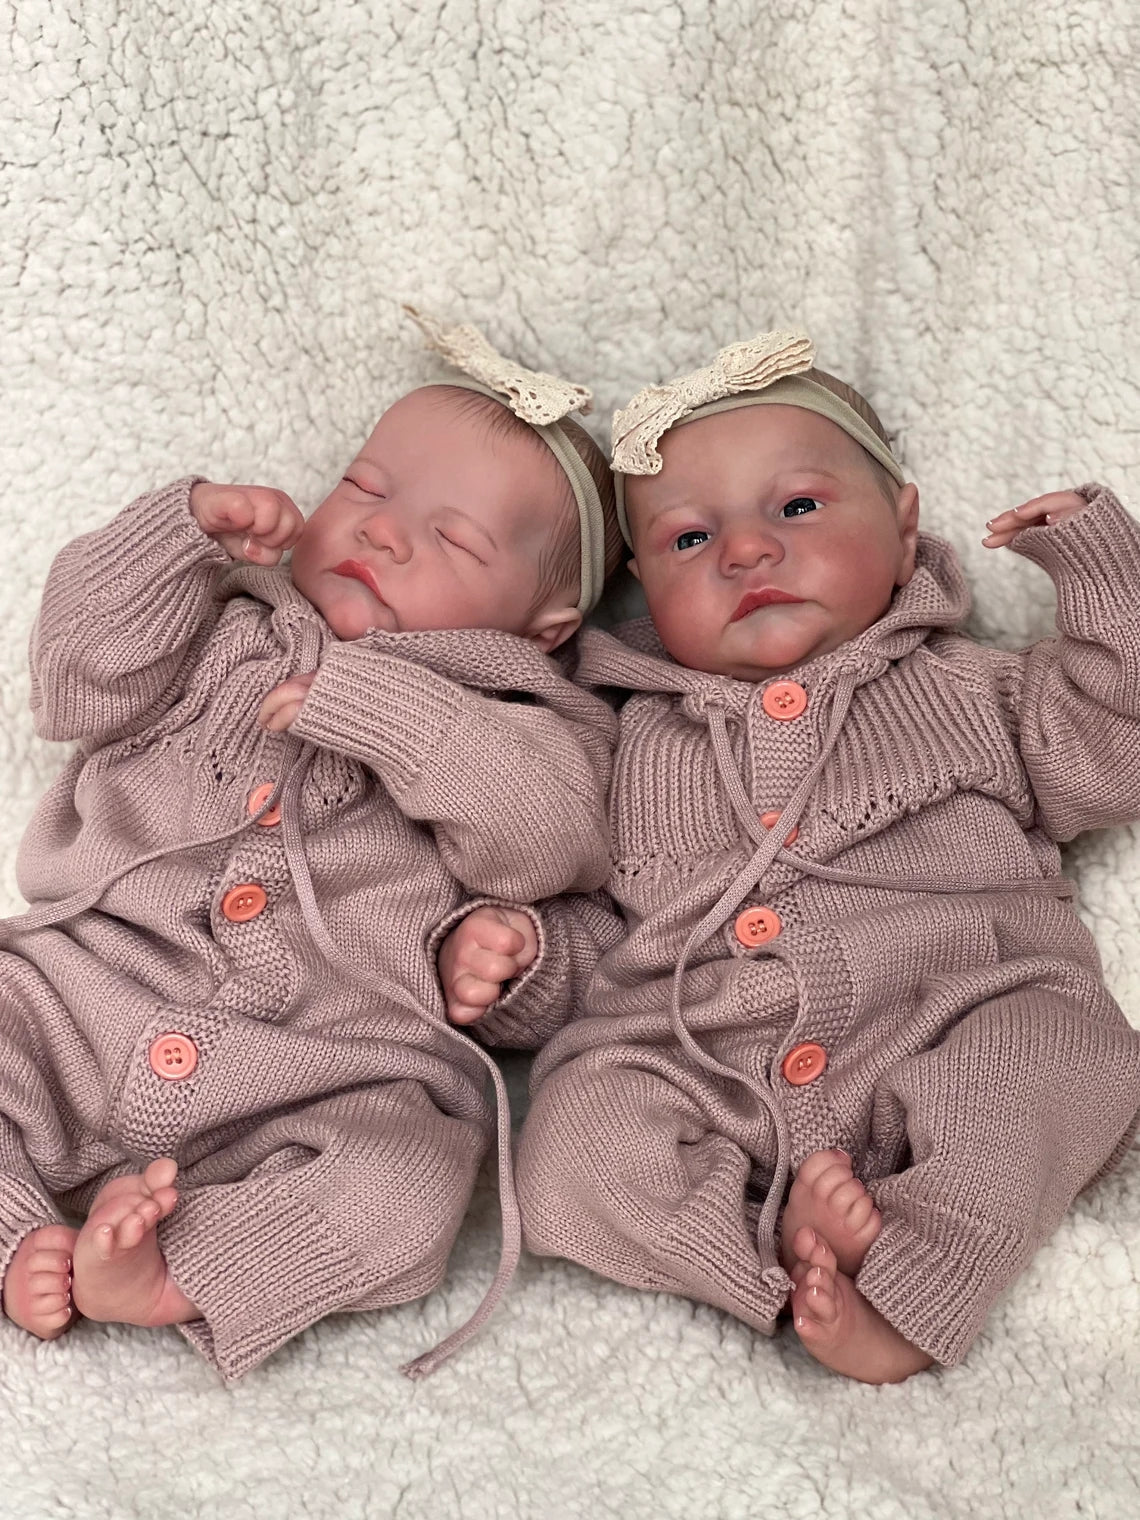 Lifelike Reborn Baby Dolls Twins Awake & Sleeping 19 Inch Visible Veins Realistic Newborn Babies Dolls That Look Real Baby Toys Dolls Gift for Ages 3+